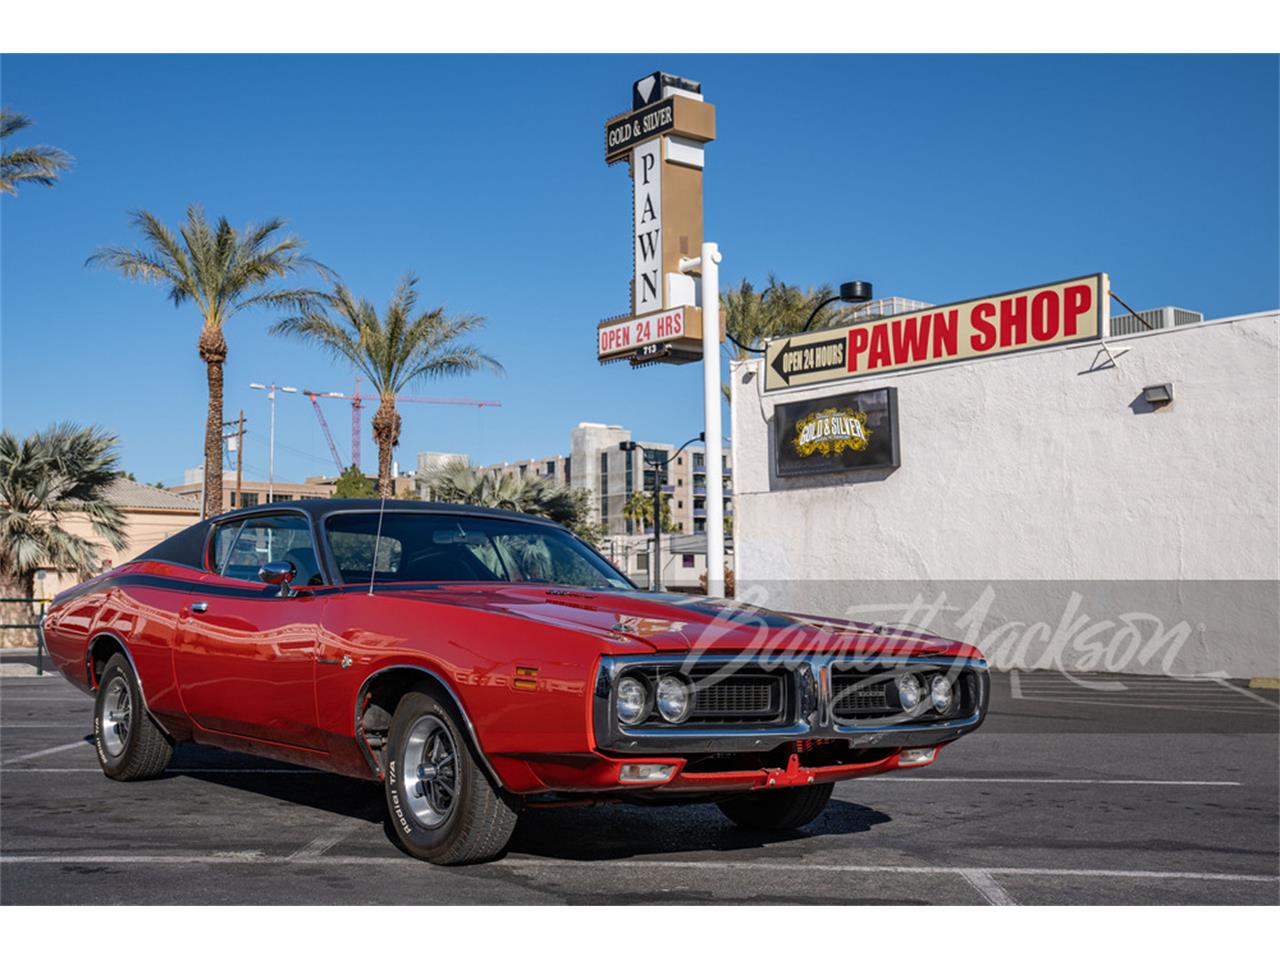 For Sale at Auction: 1971 Dodge Super Bee in Scottsdale, Arizona for sale in Scottsdale, AZ